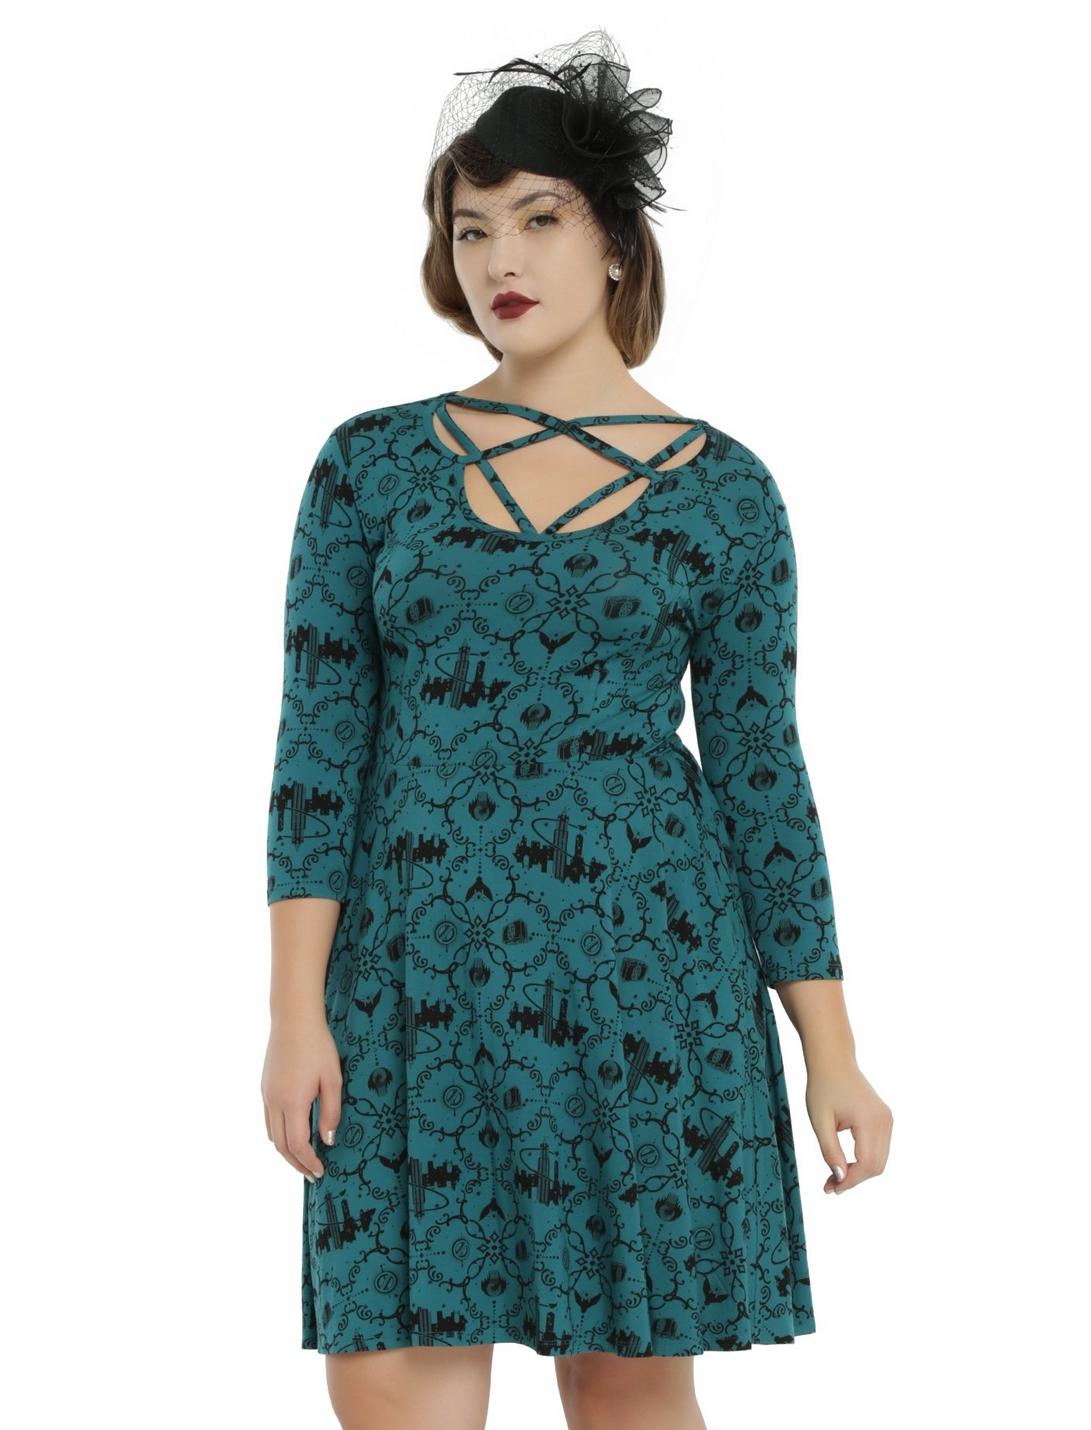 Fantastic Beasts And Where To Find Them Strappy Icons Dress Plus Size, TEAL, hi-res